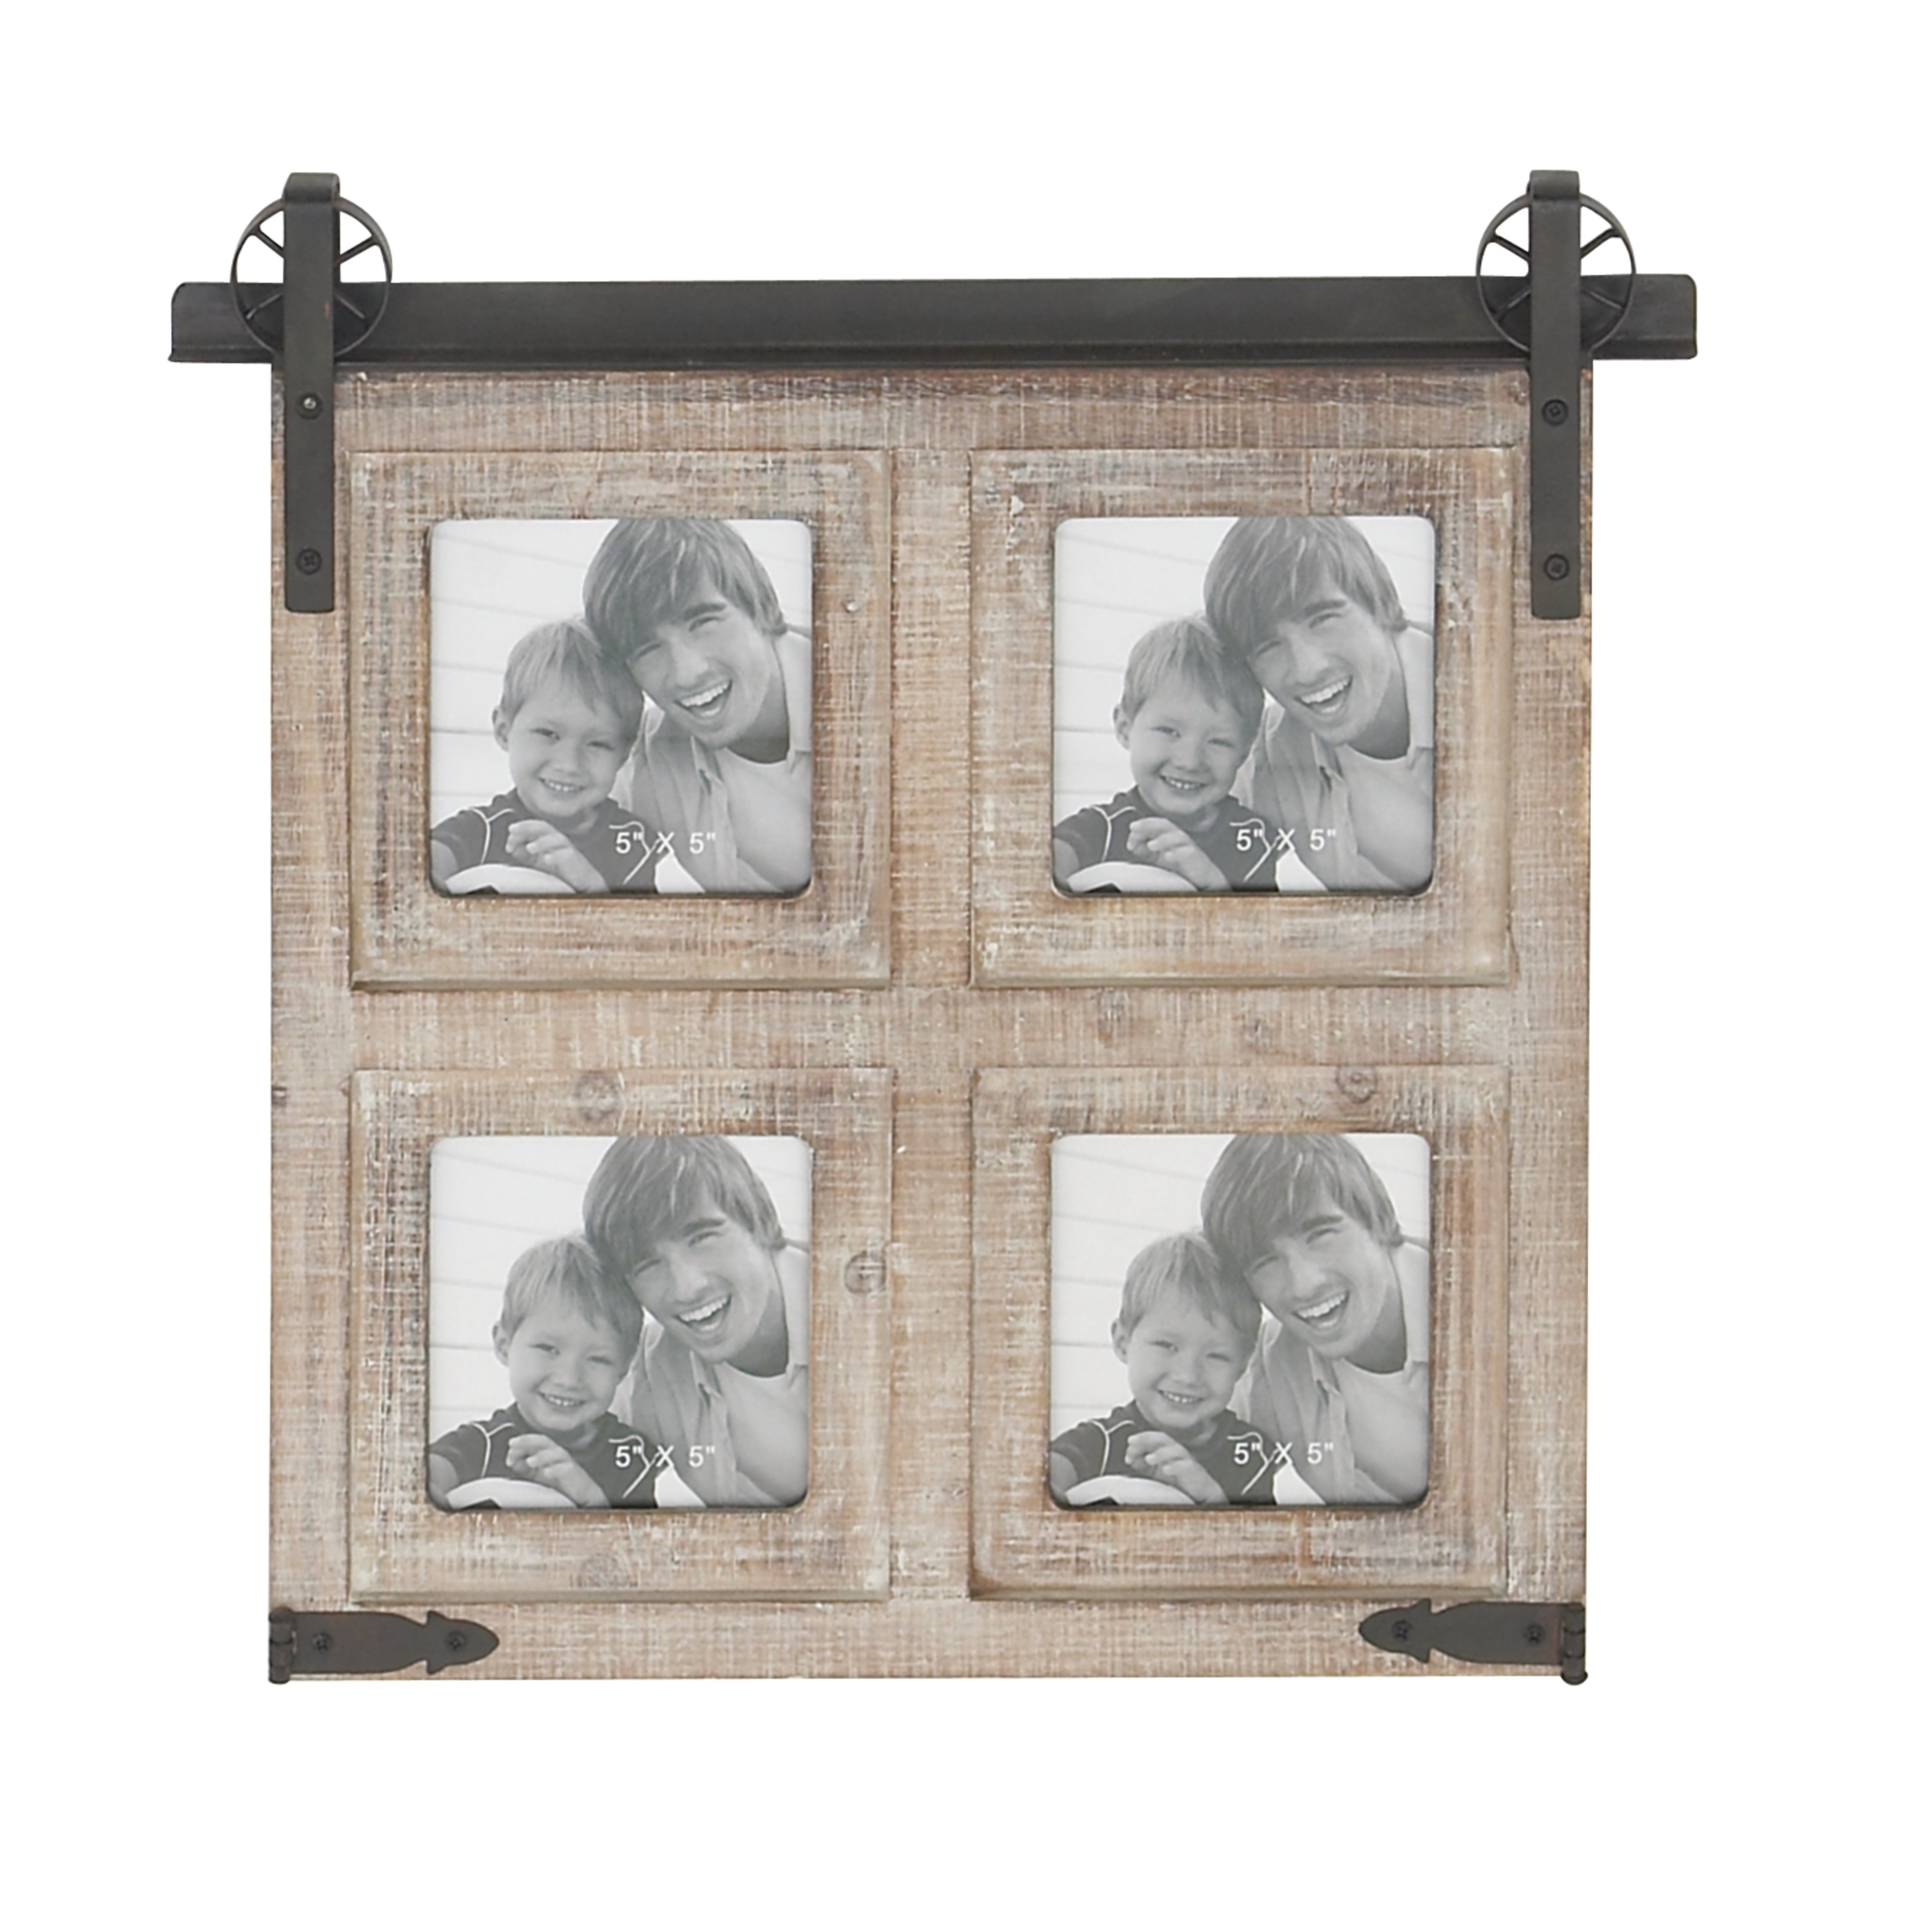 Barnyard Designs 4x6 or 5x7 Collage Picture Frames, 4 Photo openings w/Mat for Multiple Pictures, Distressed Rustic Wood Farmhouse Frame for Wall, Whi